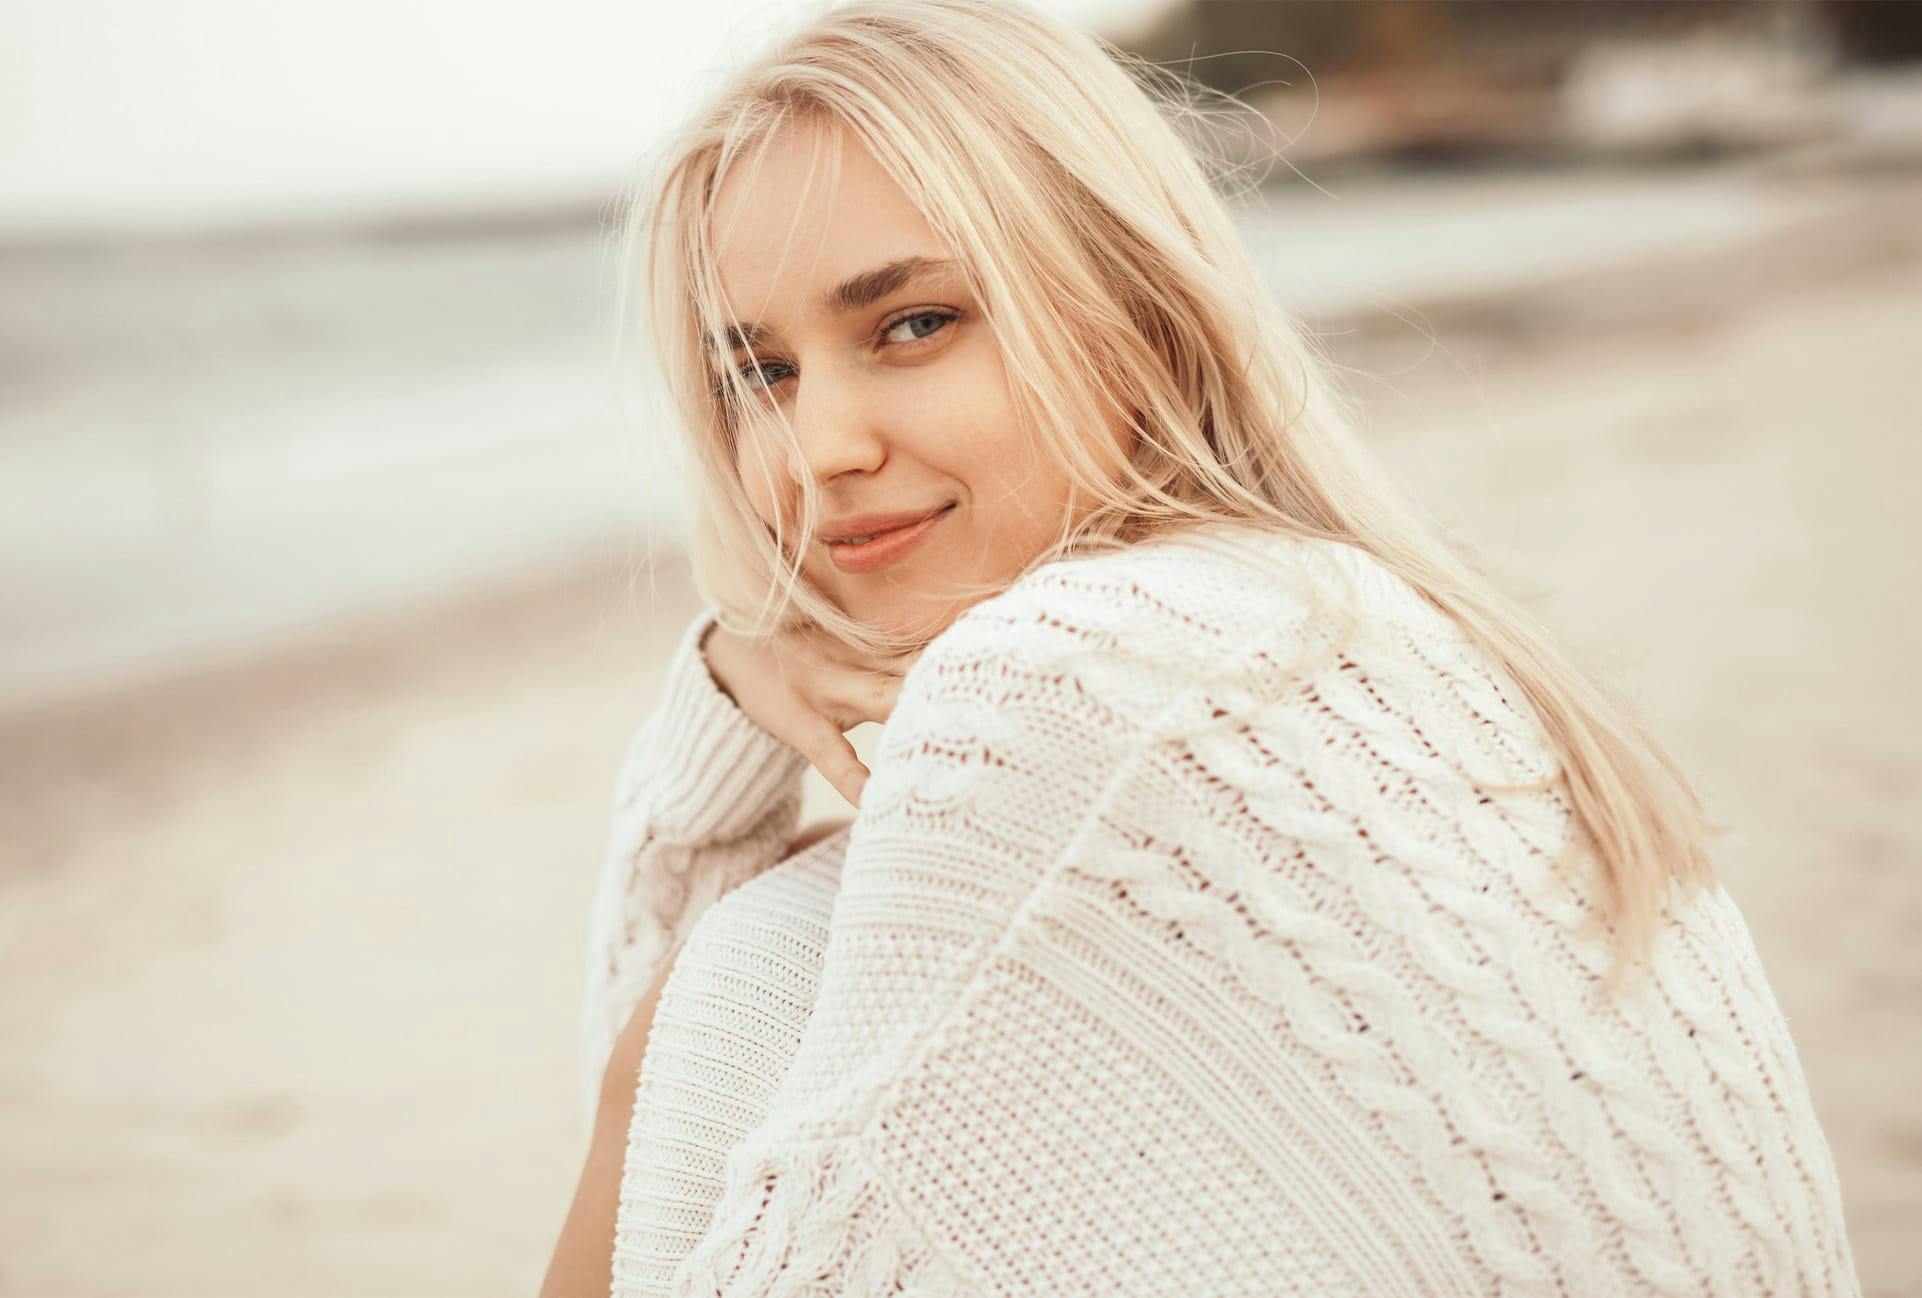 Woman with blonde hair wearing a knit sweater at the beach